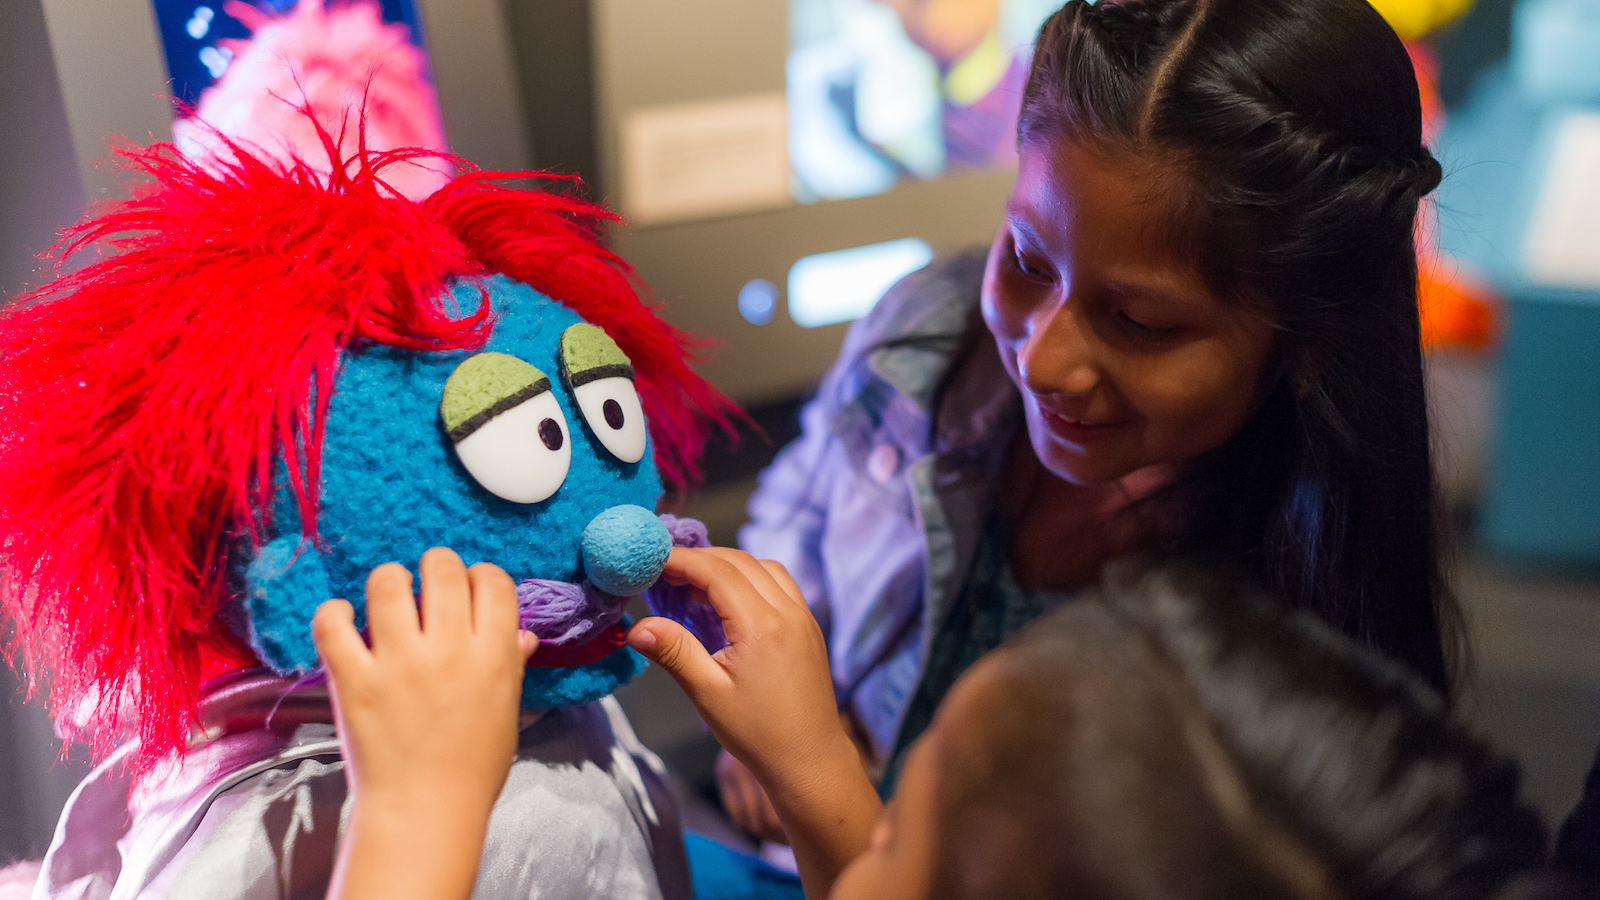 A kid designs a muppet at the interactive "Anything Muppet" station in The Jim Henson Exhibition at Museum of the Moving Image.